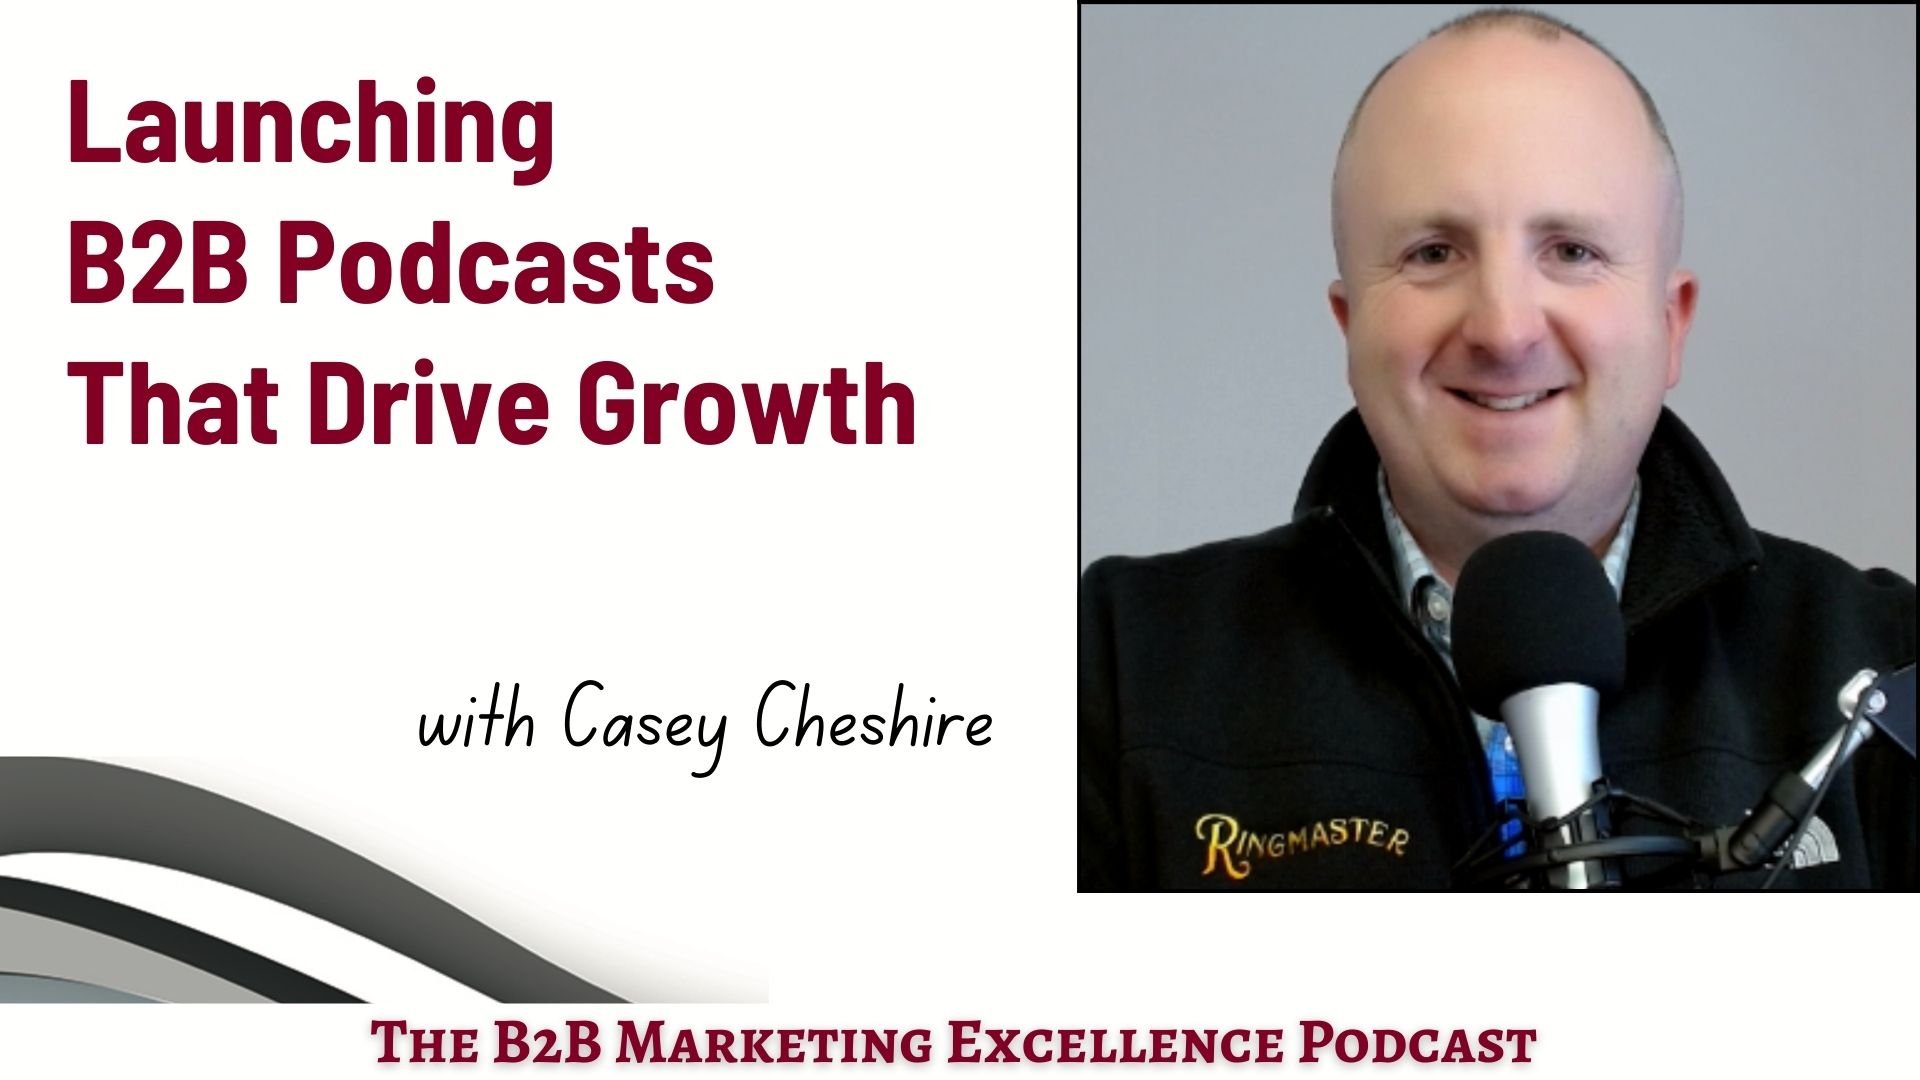 Launching B2B Podcasts That Drive Growth